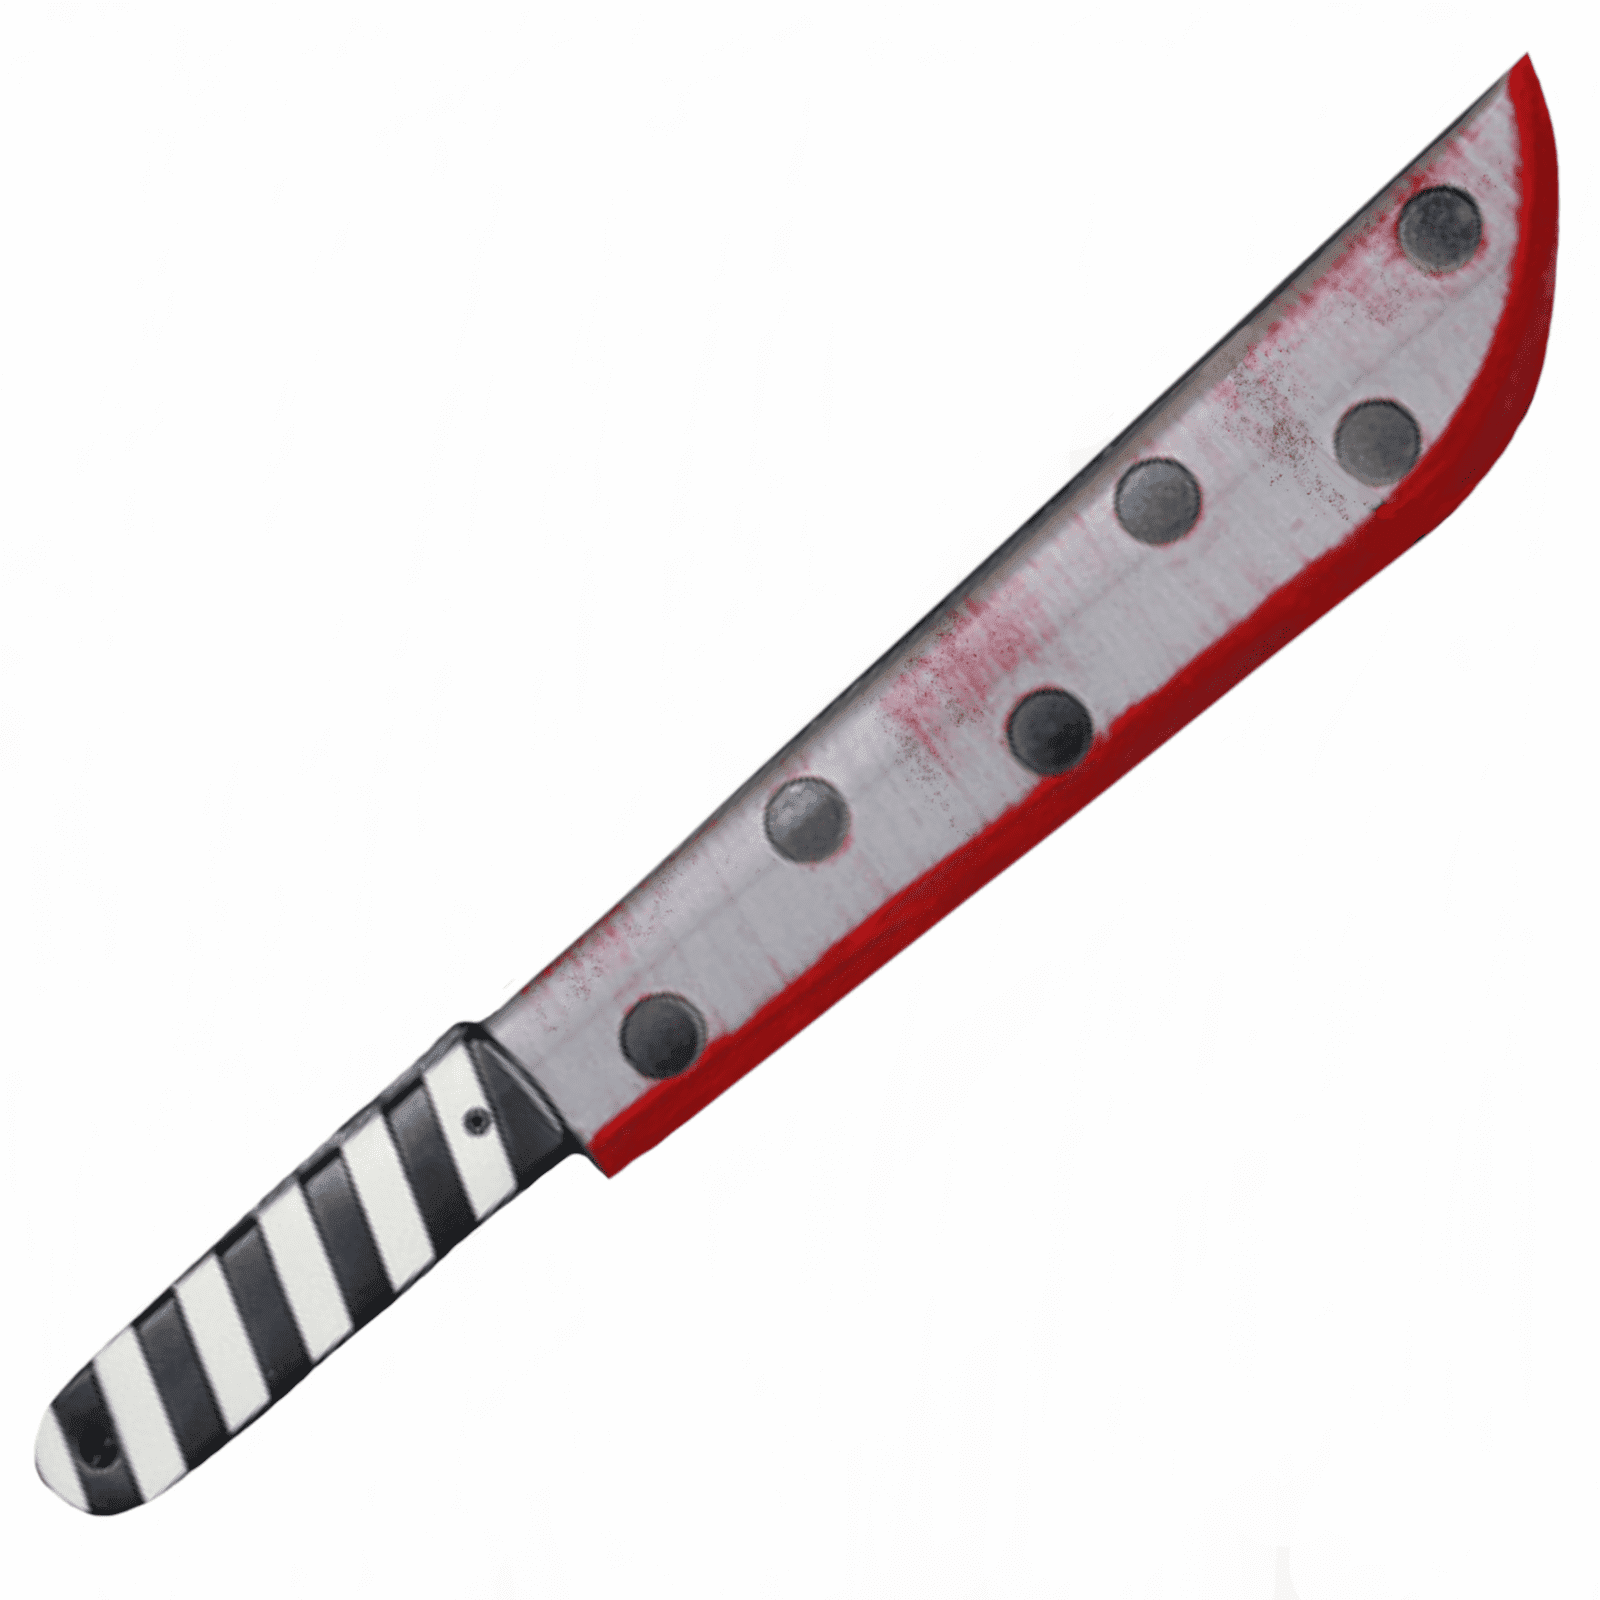 Featured image for “Creepy Clown Machette”